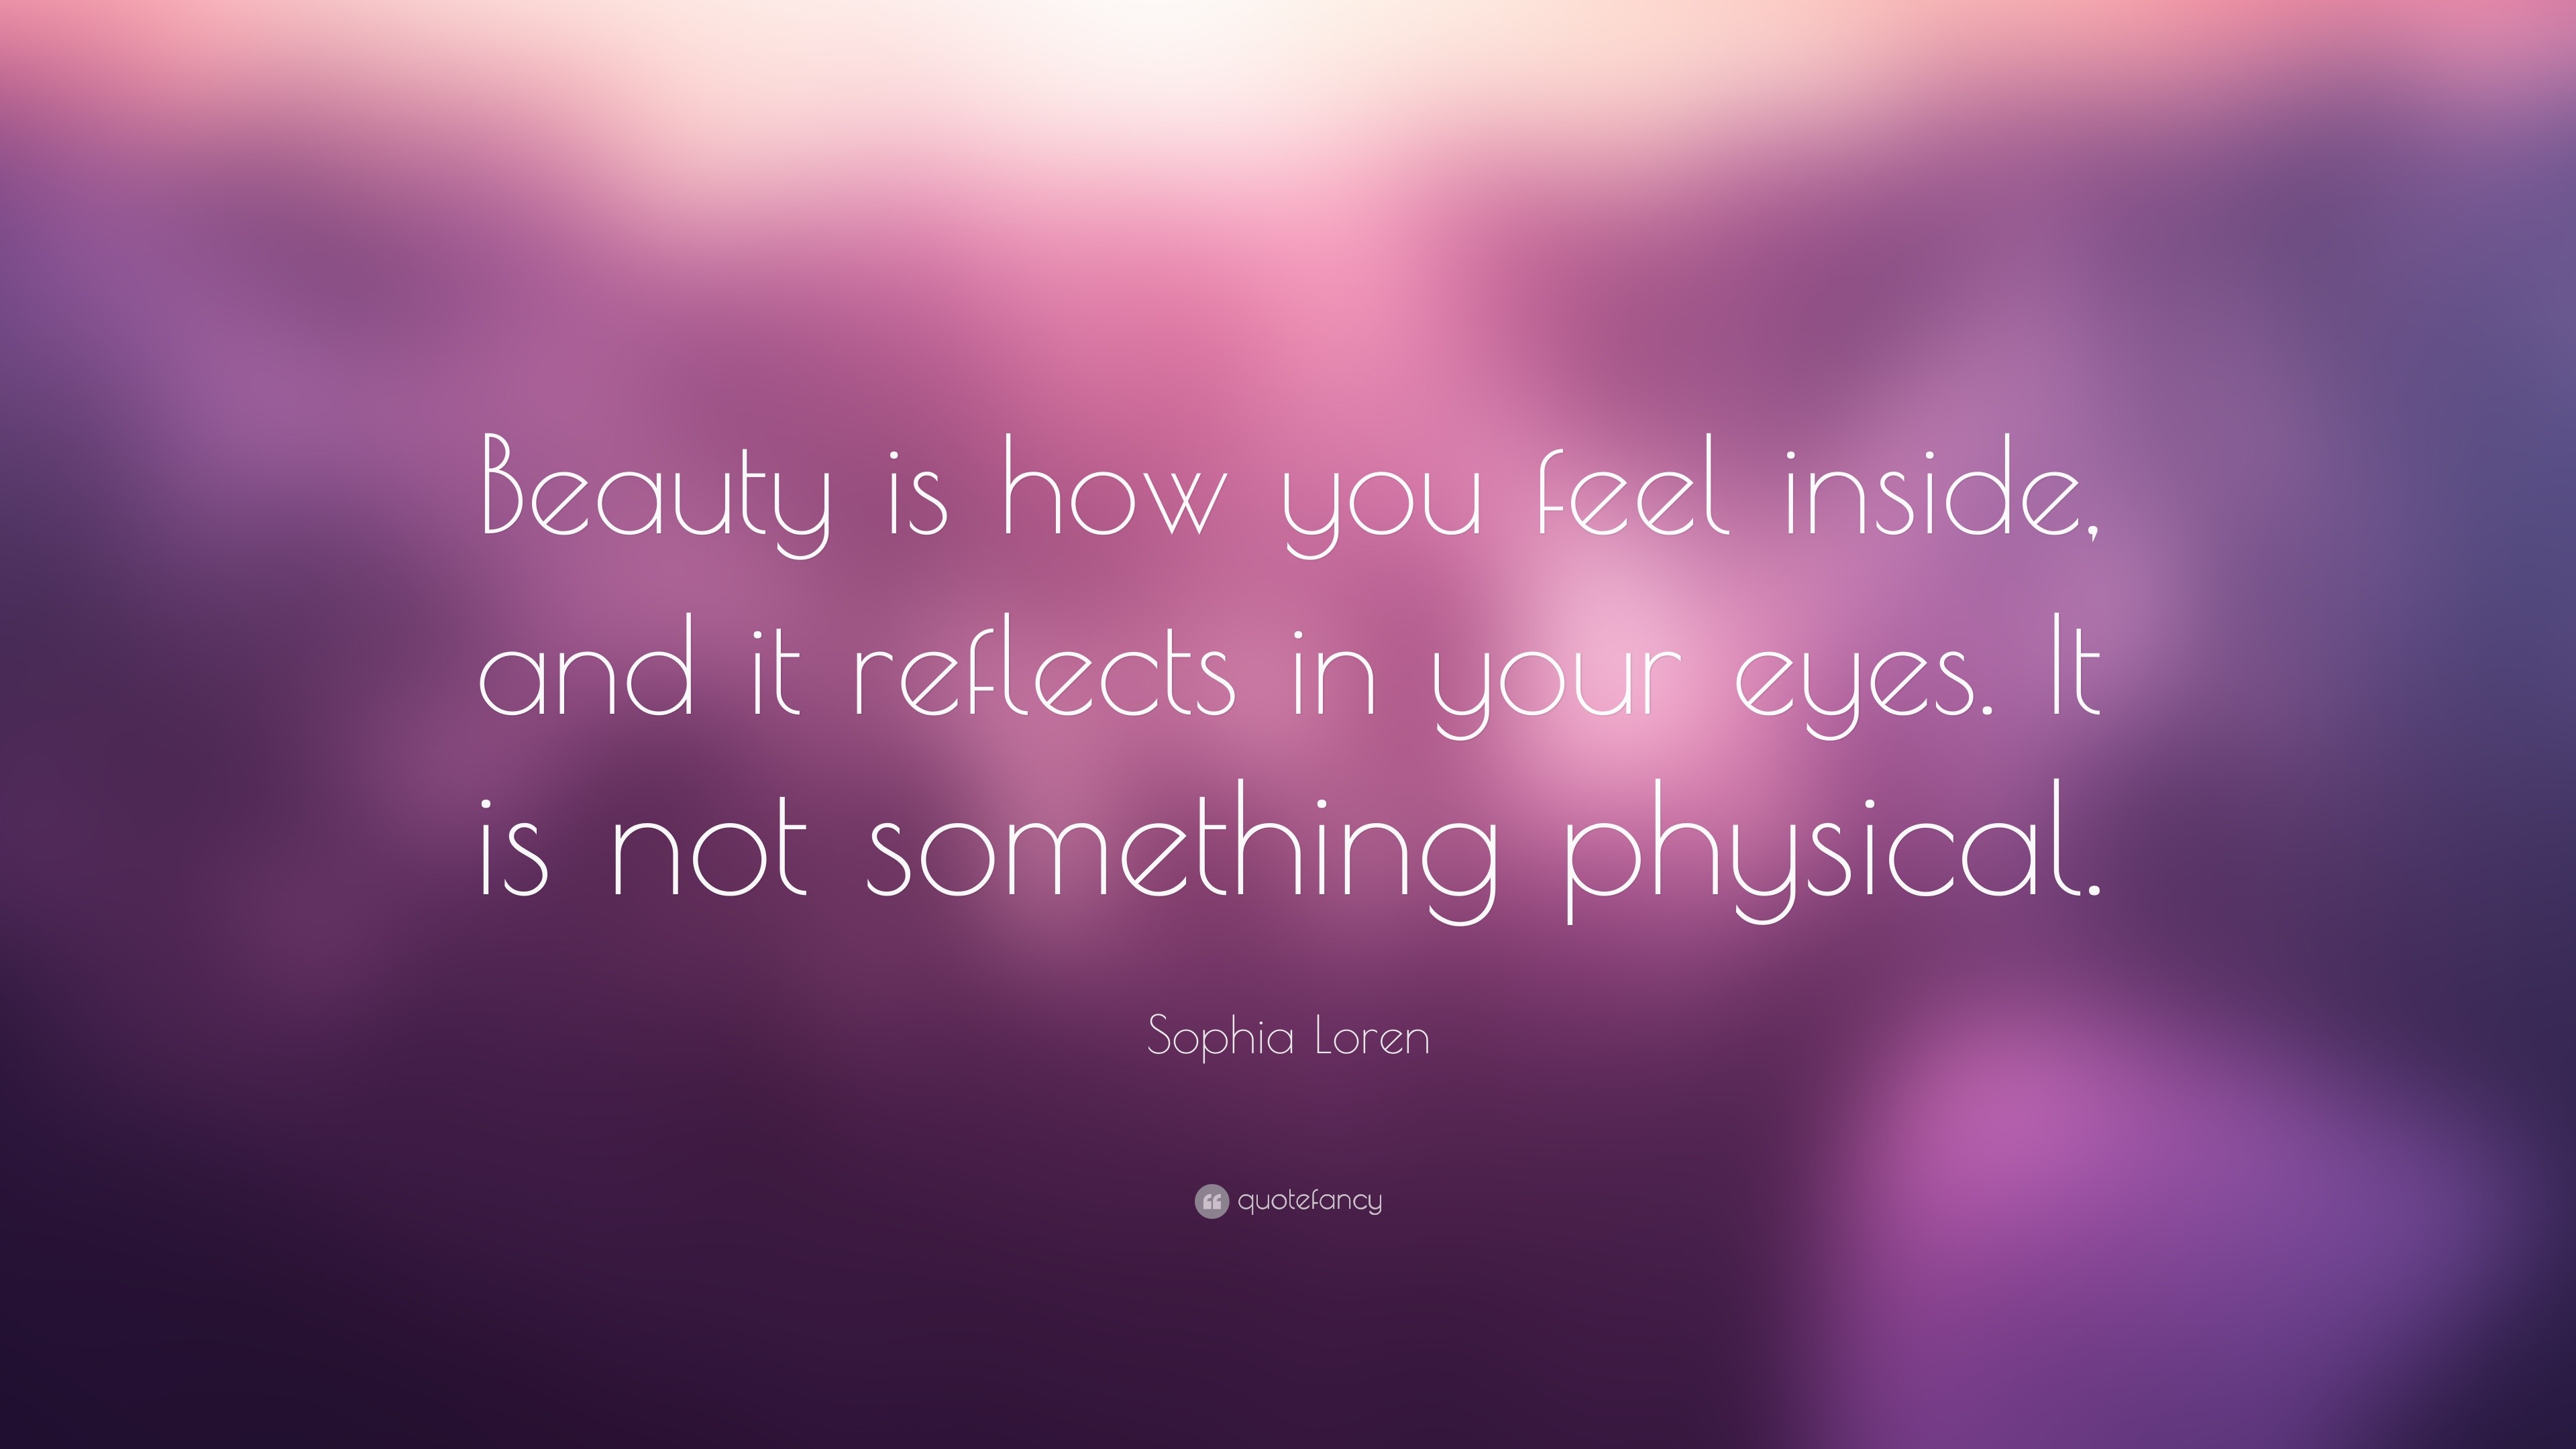 Sophia Loren Quote: “Beauty is how you feel inside, and it reflects in ...